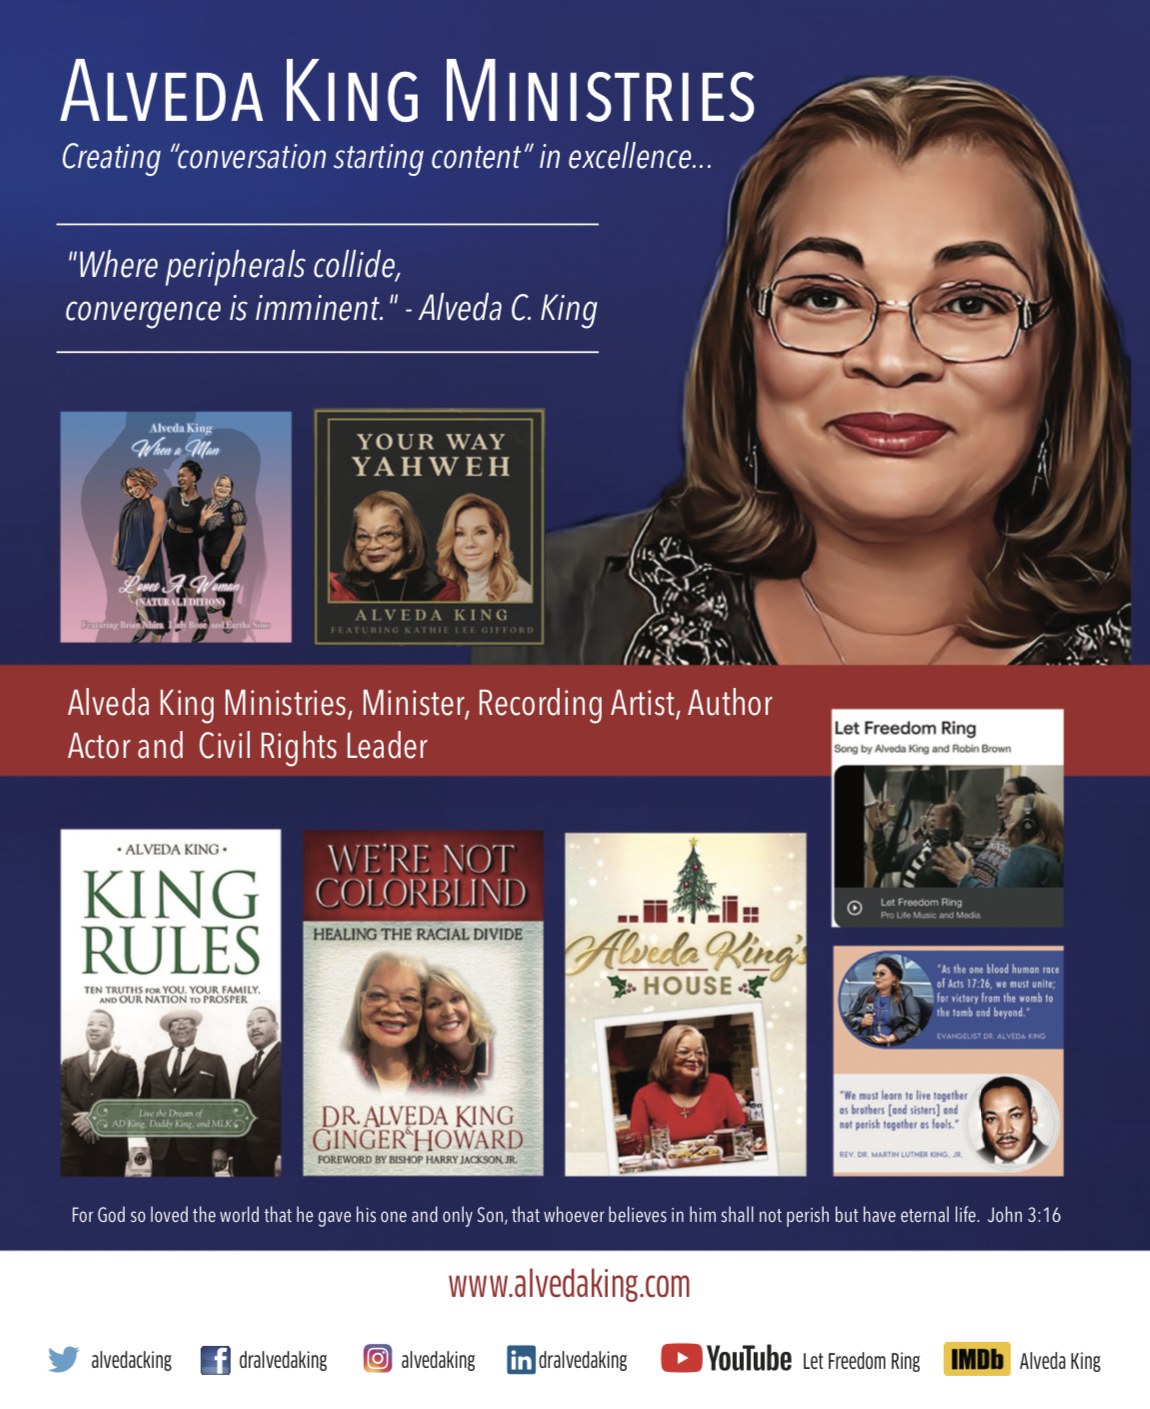 About Alveda King